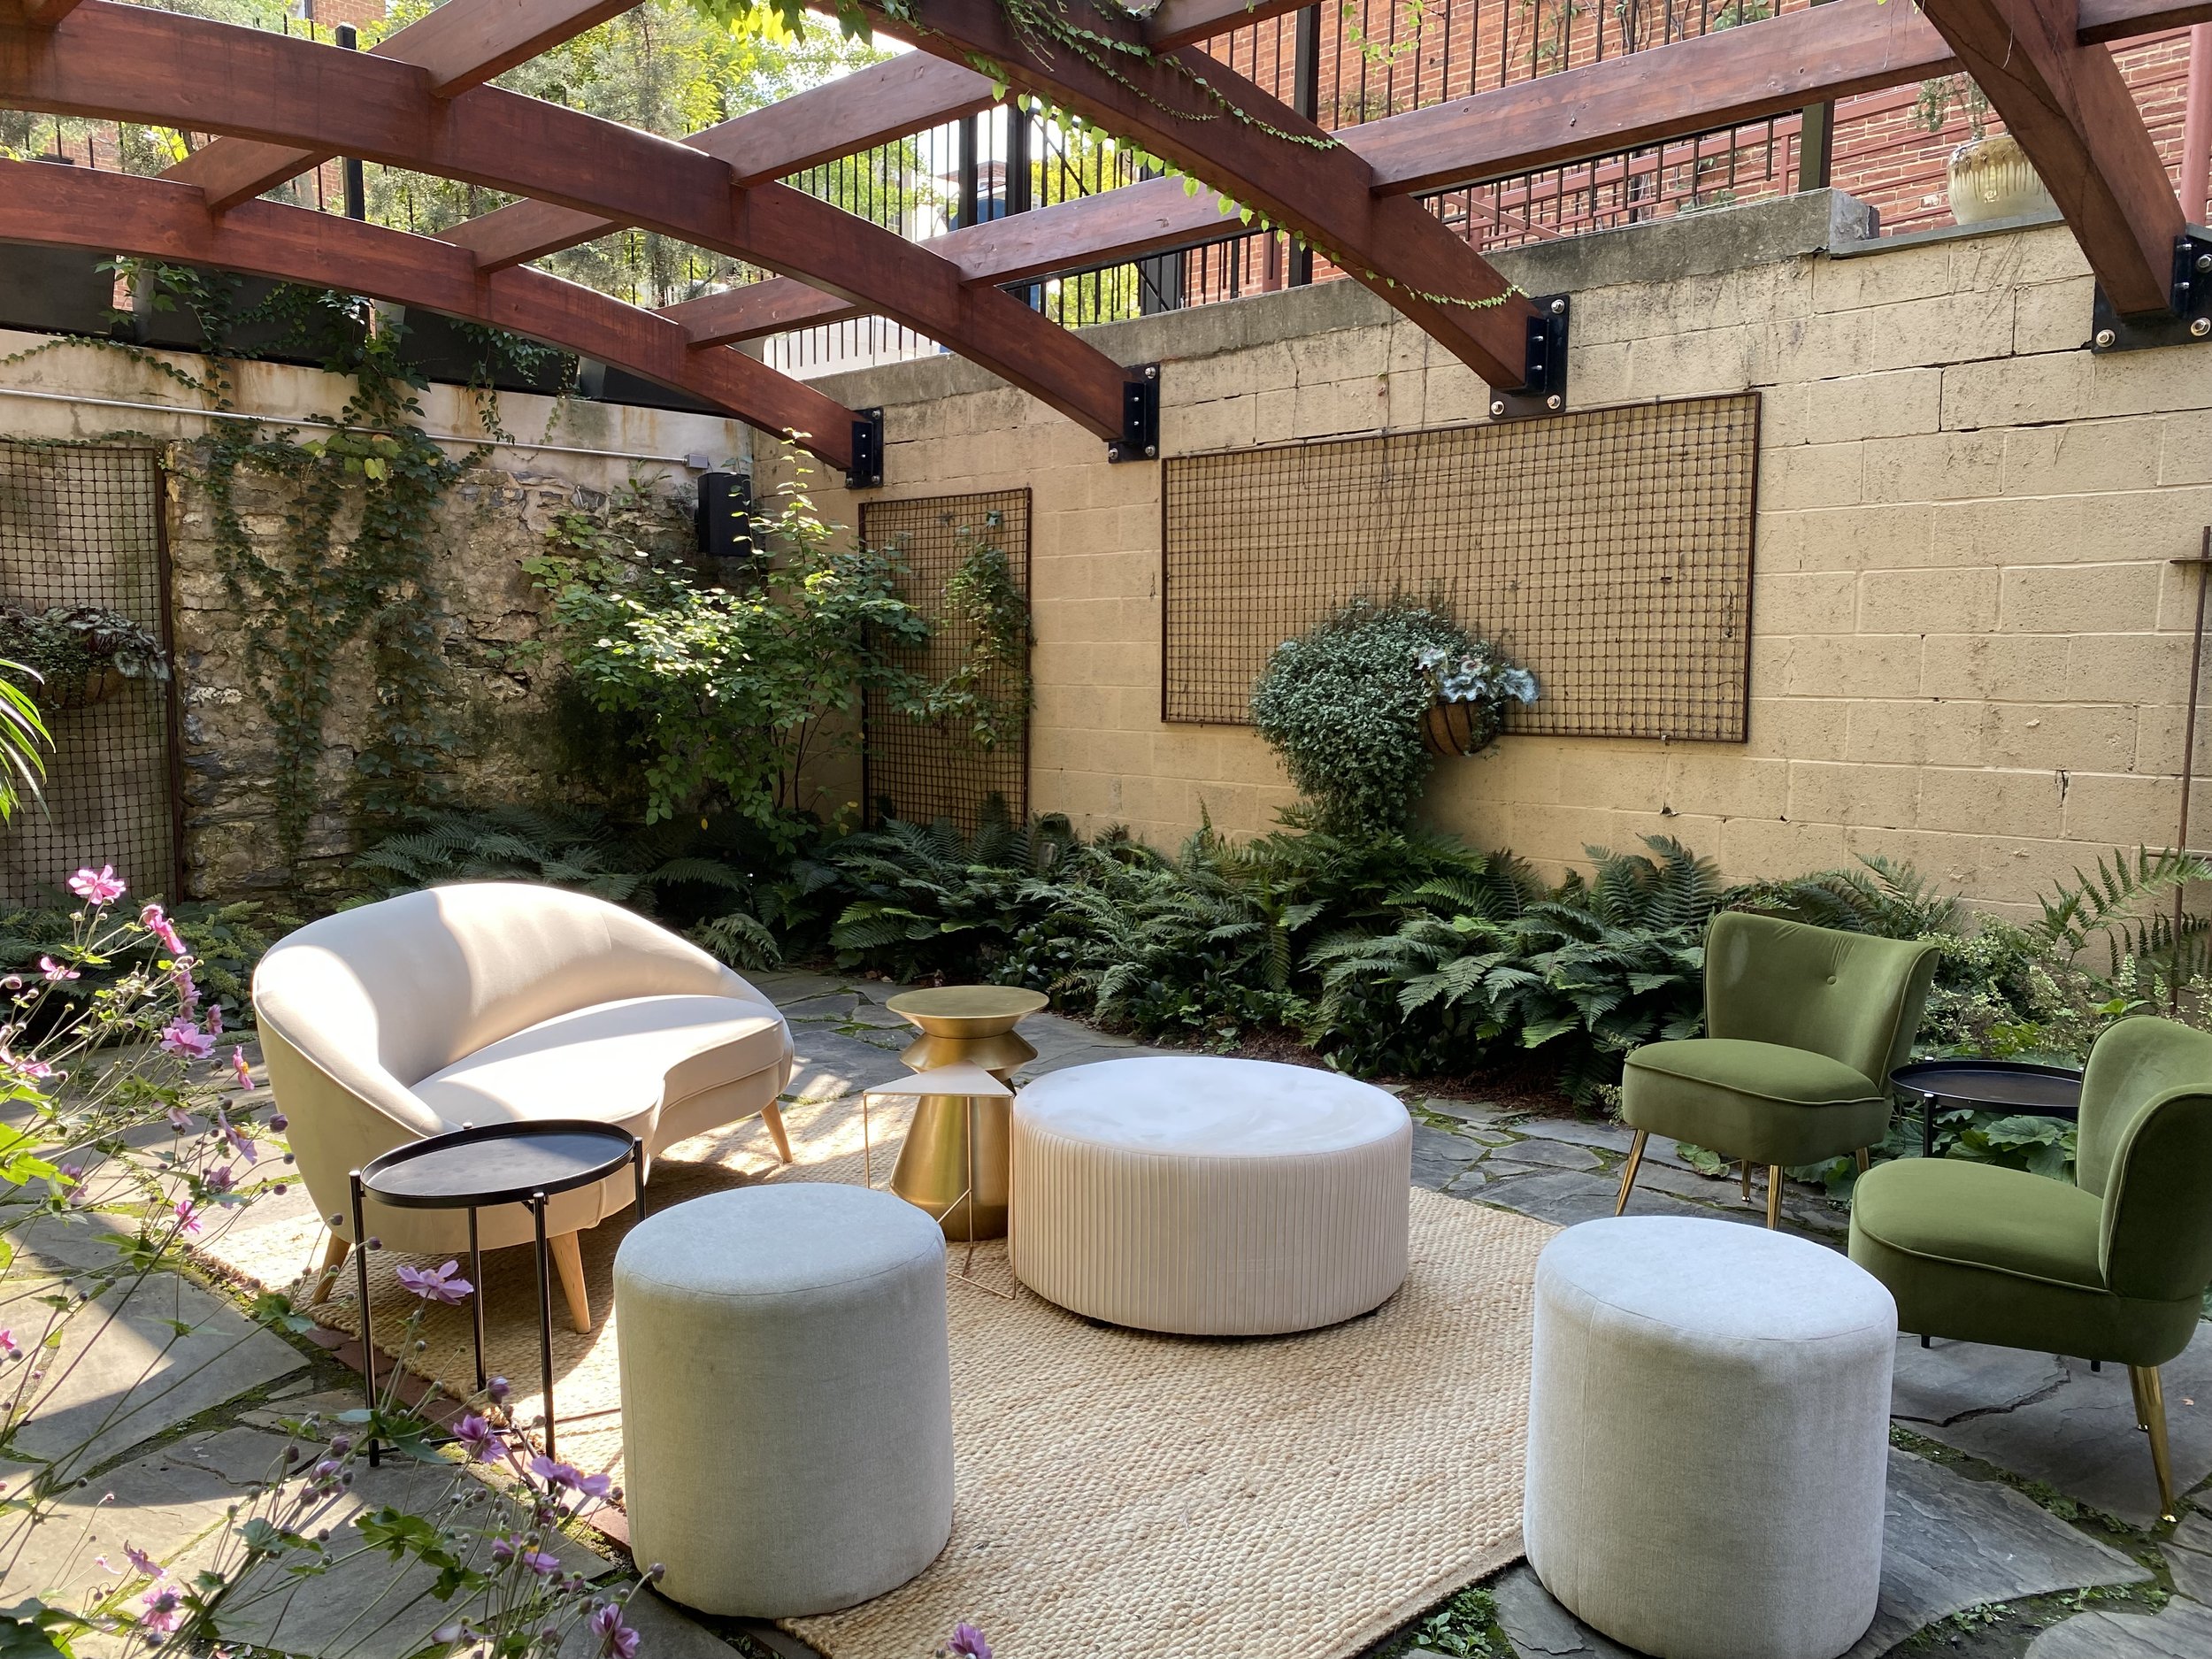 Lounge space seating contemporary set up outdoor pergola in Garden Courtyard of Excelsior Lancaster PA